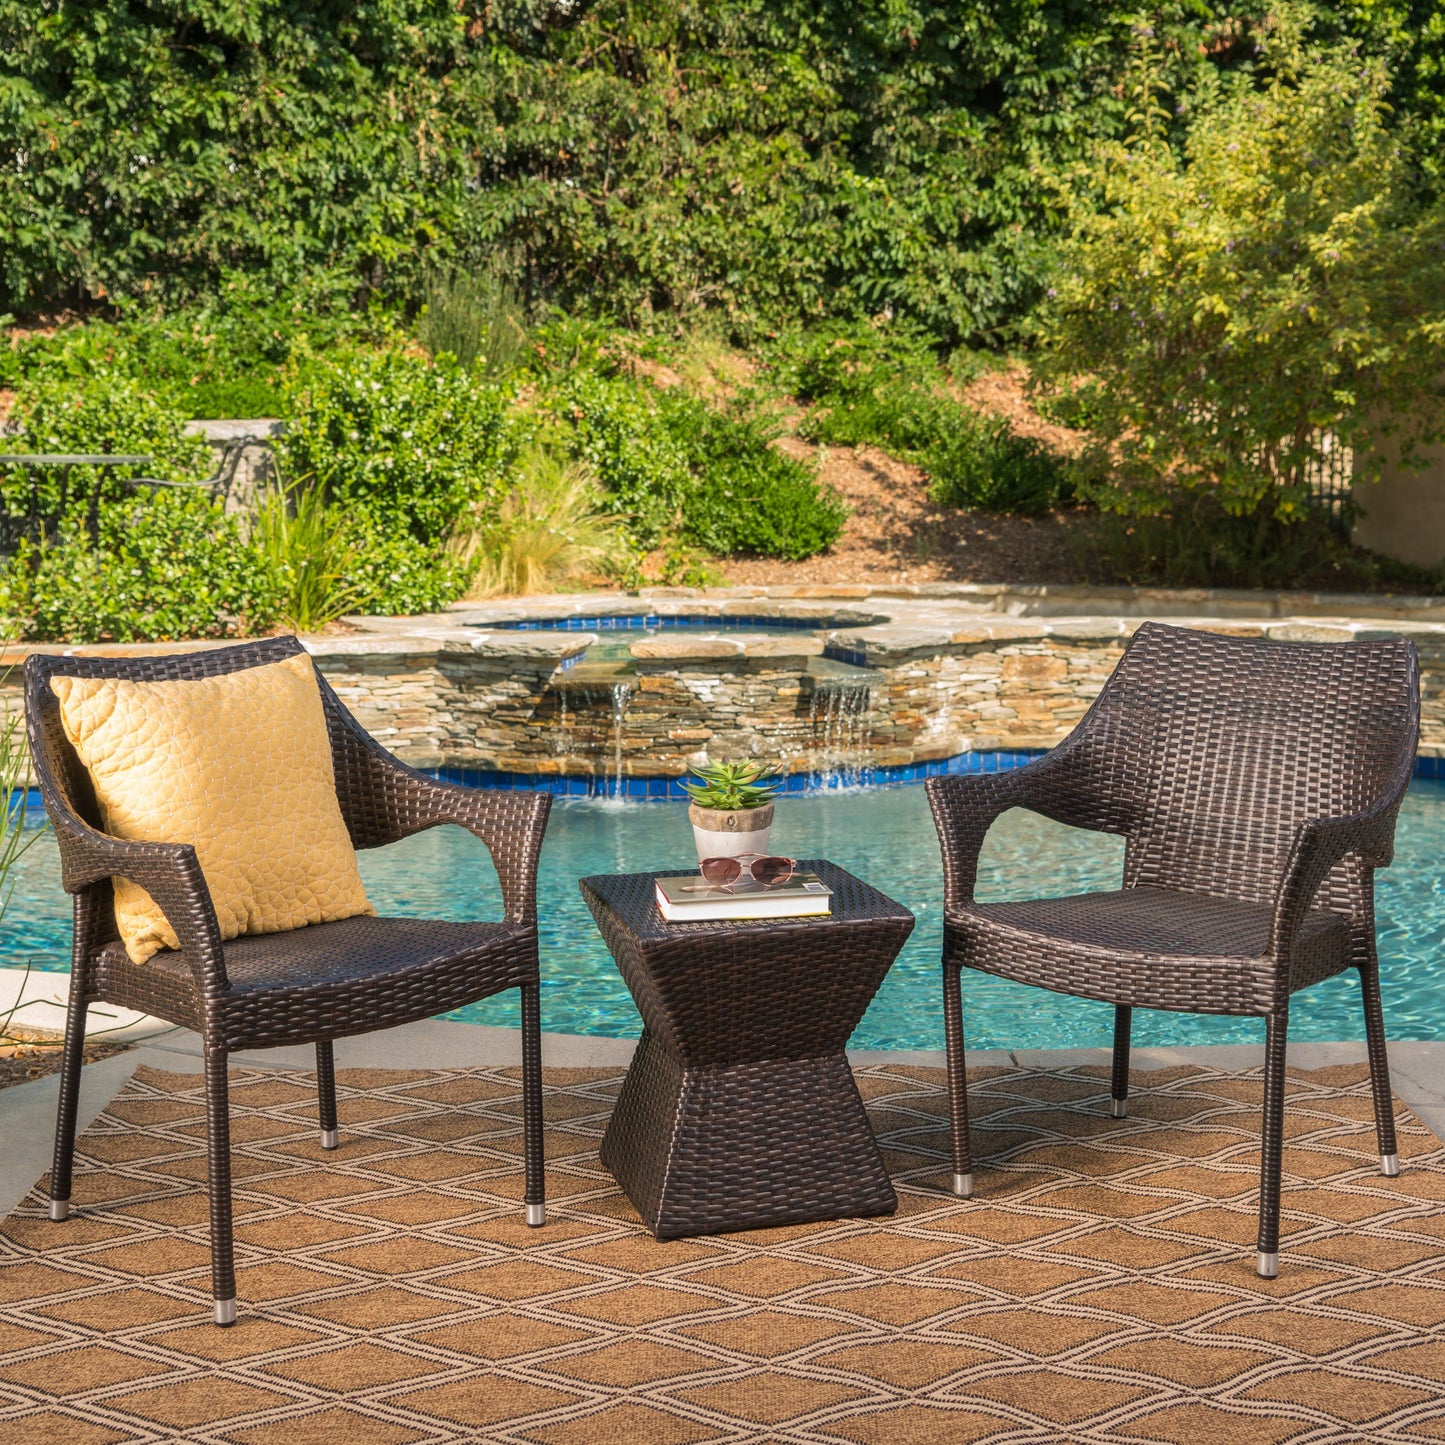 Arlost Outdoor 3 Piece Multi-Brown Wicker Chat Set with Stacking Chairs